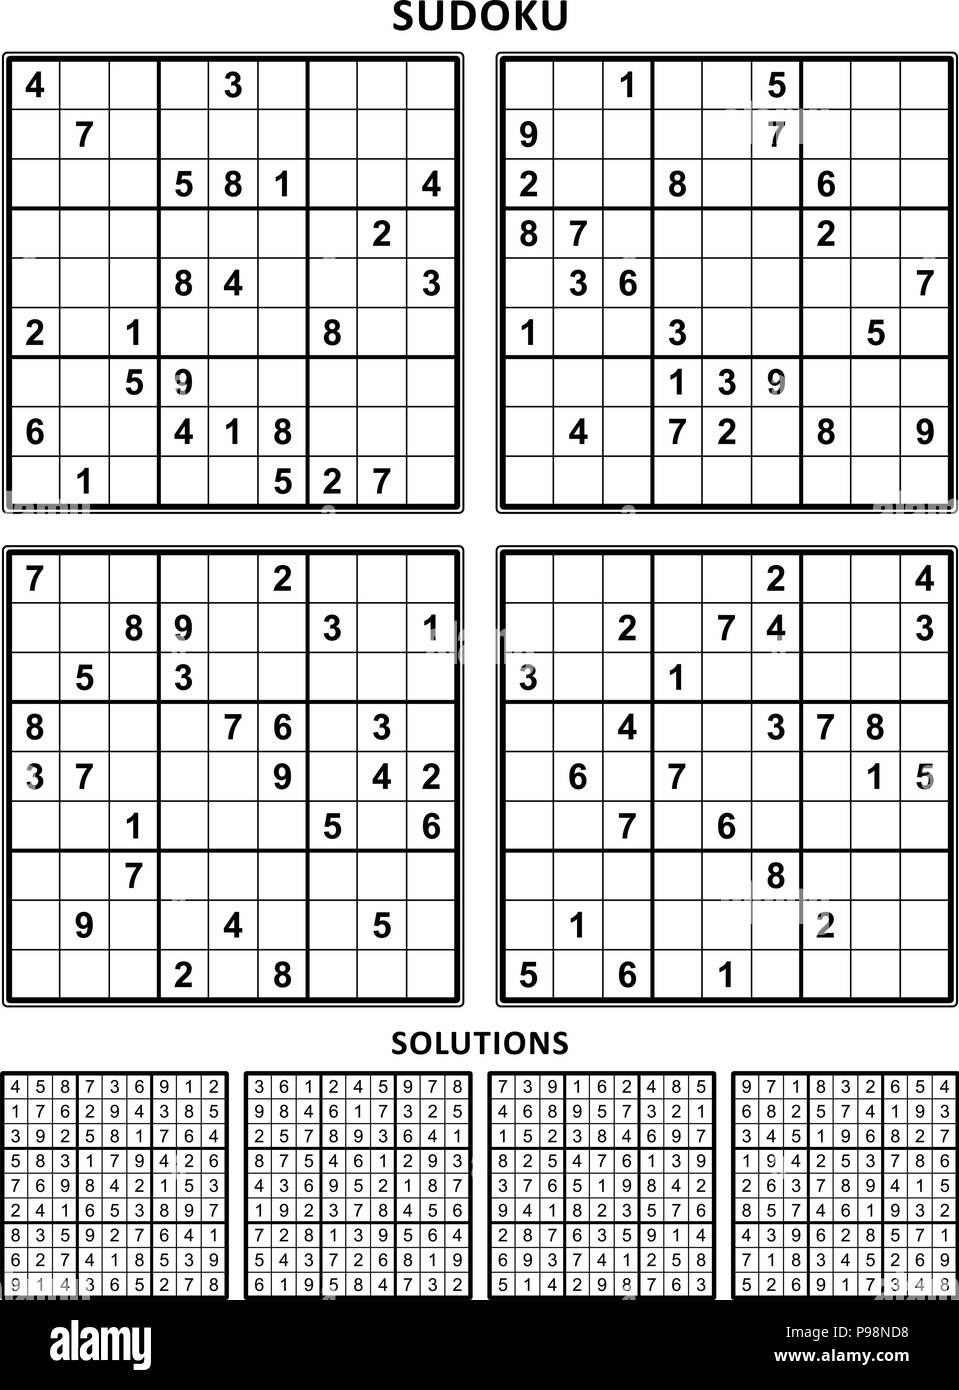 Four sudoku puzzles of comfortable (easy, yet not very easy) level, on A4 or Letter sized page with margins, suitable for large print books. Set 14. Stock Vector